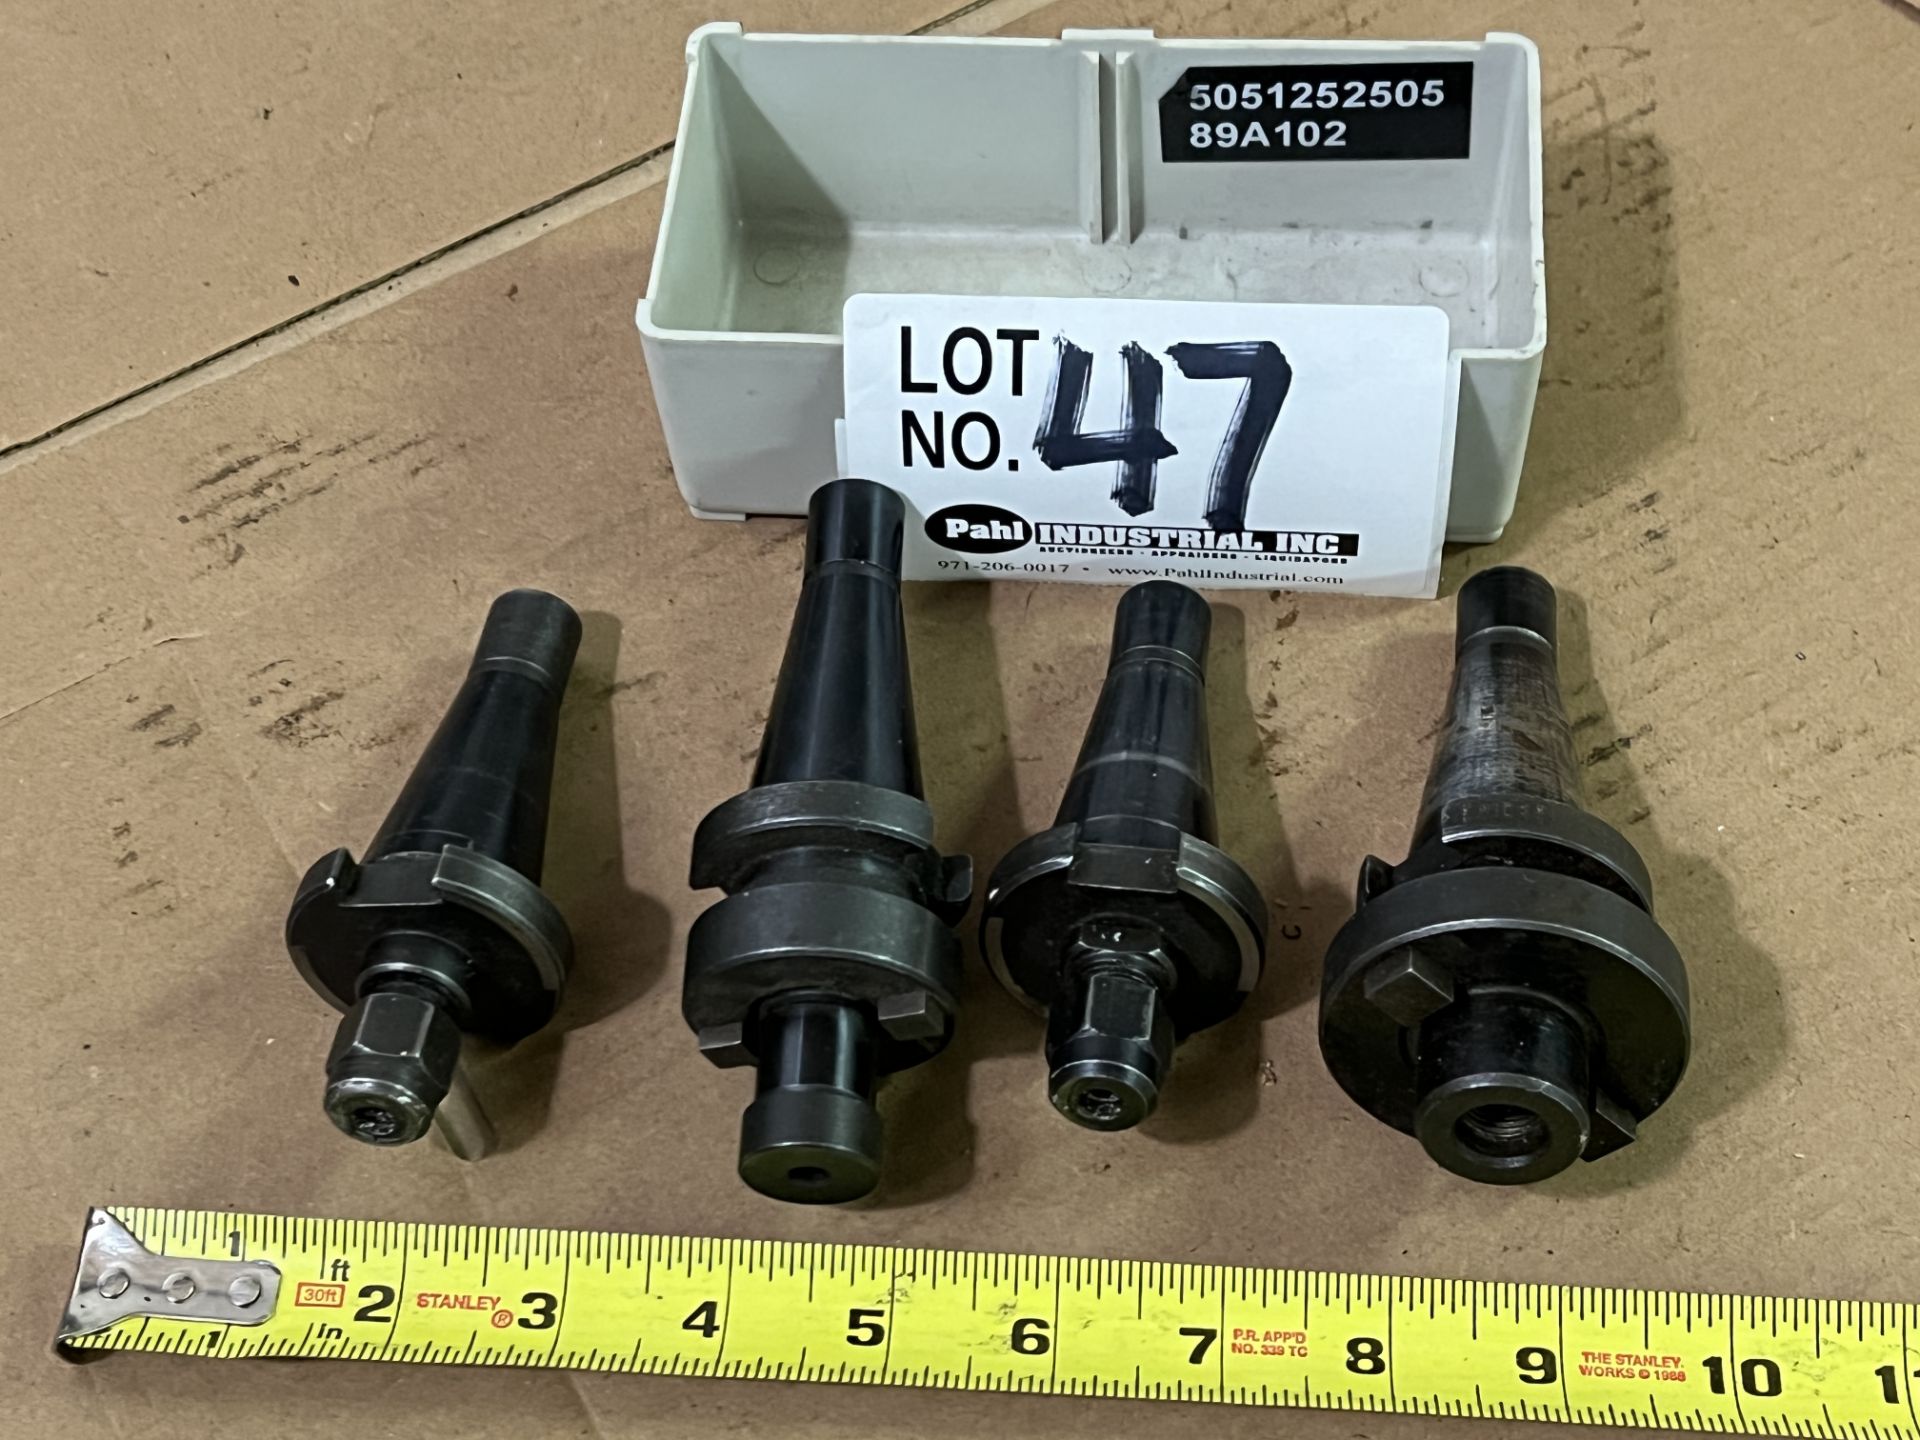 (4) Assorted NMTB30 Tool Holders